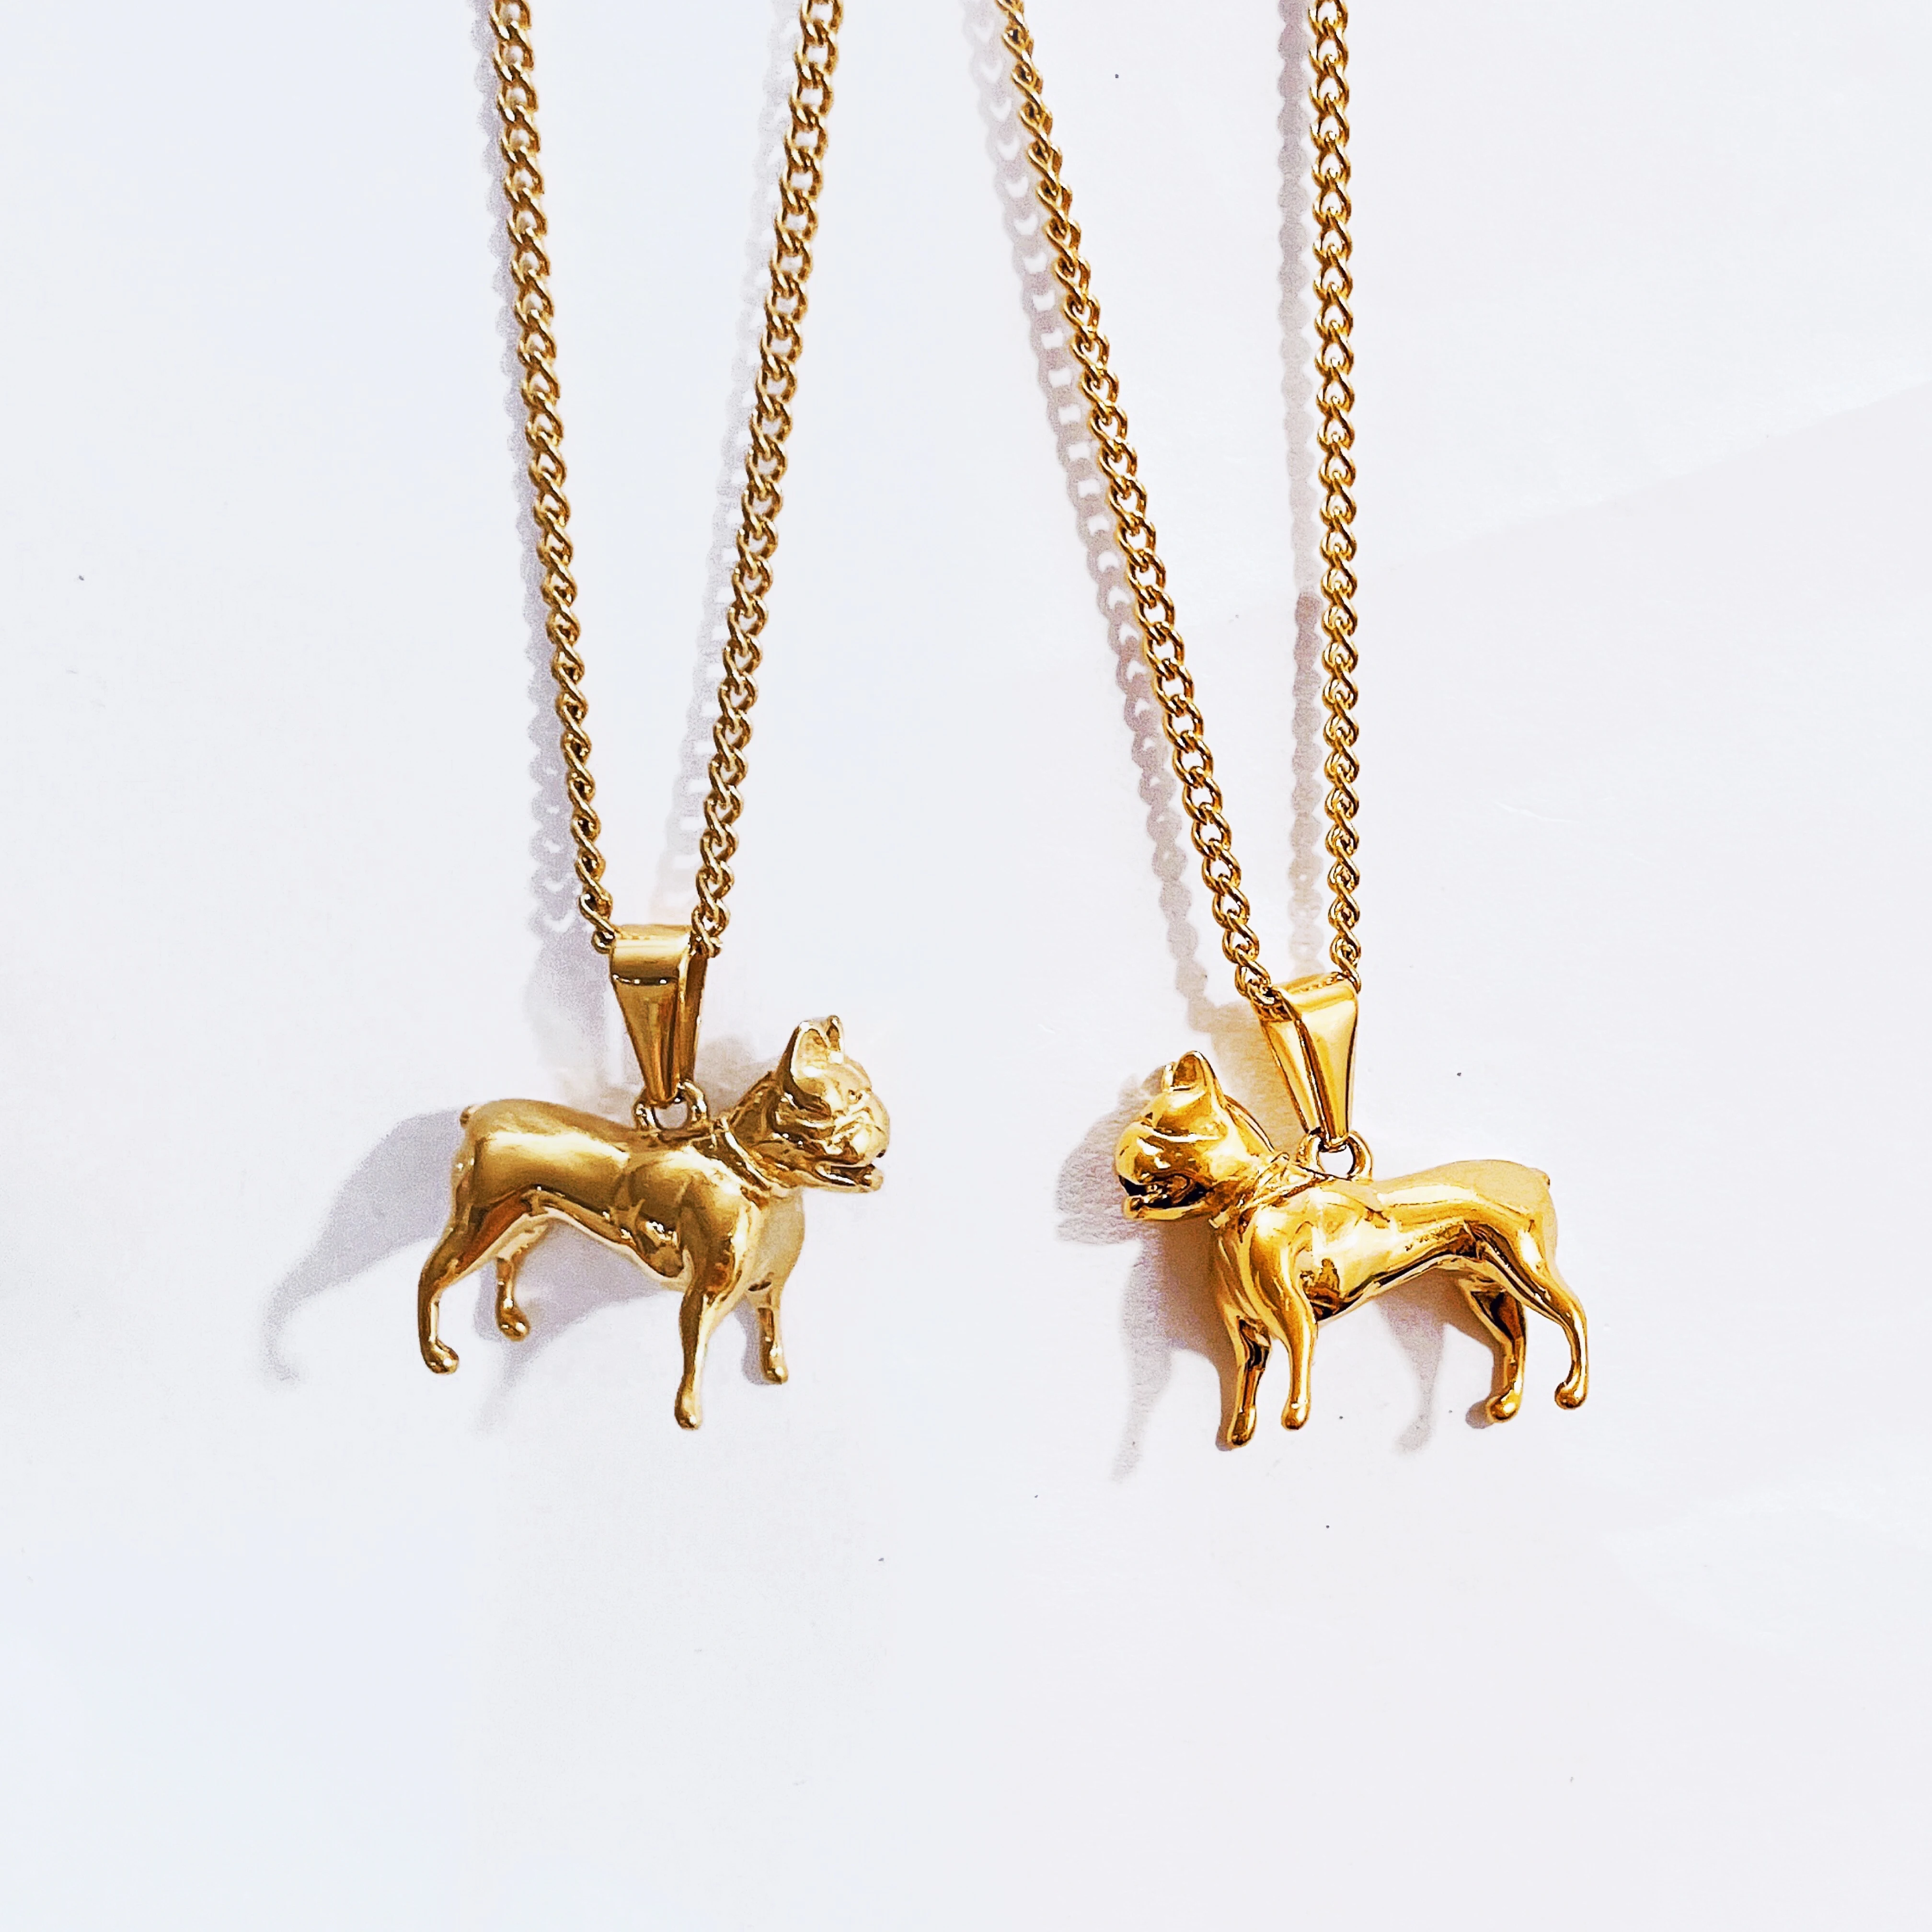 vaultroom “KEY DOG” necklace ネックレス